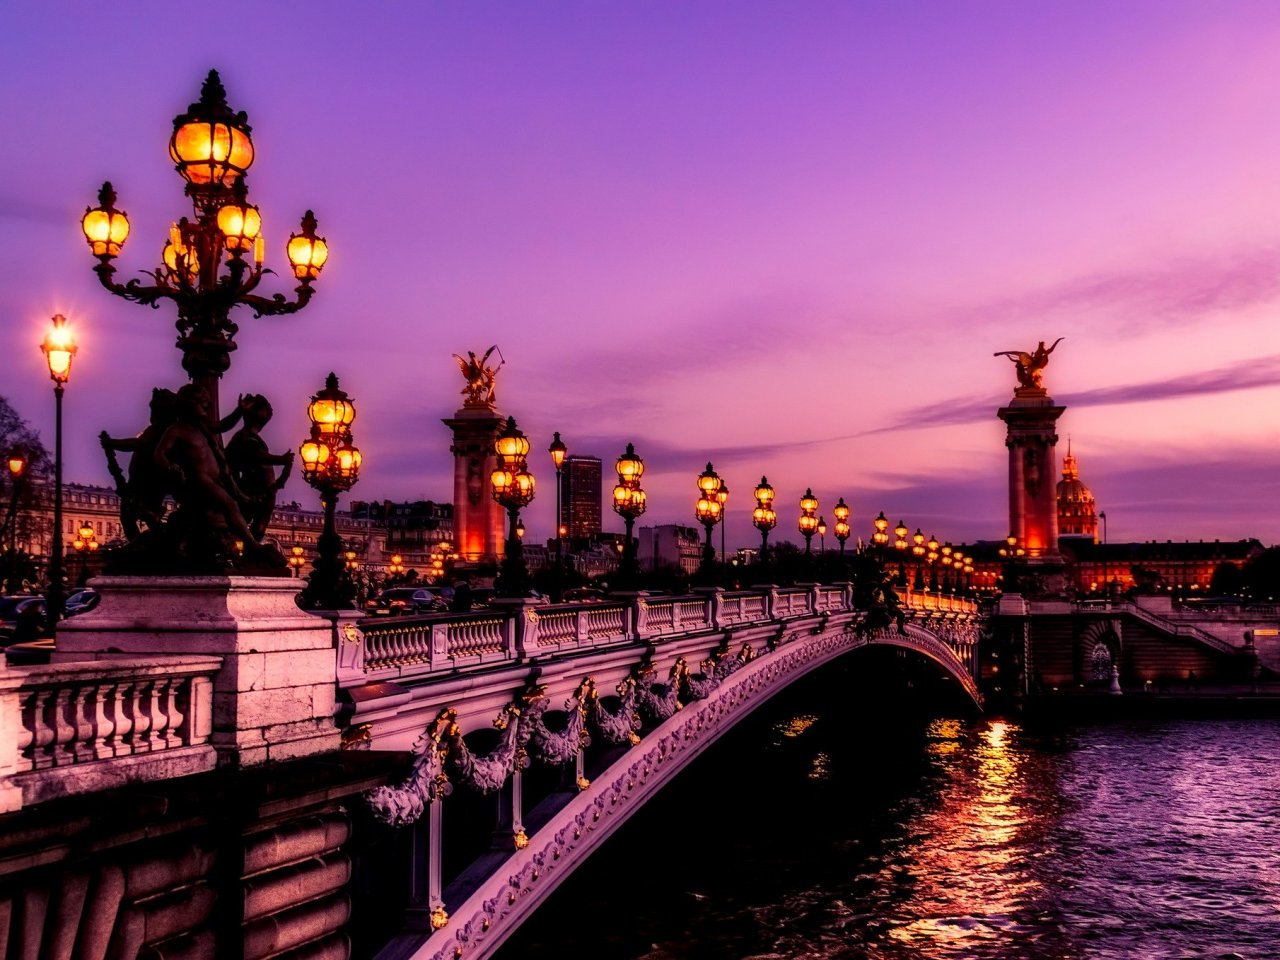 The Pont Alexandre III jigsaw puzzle